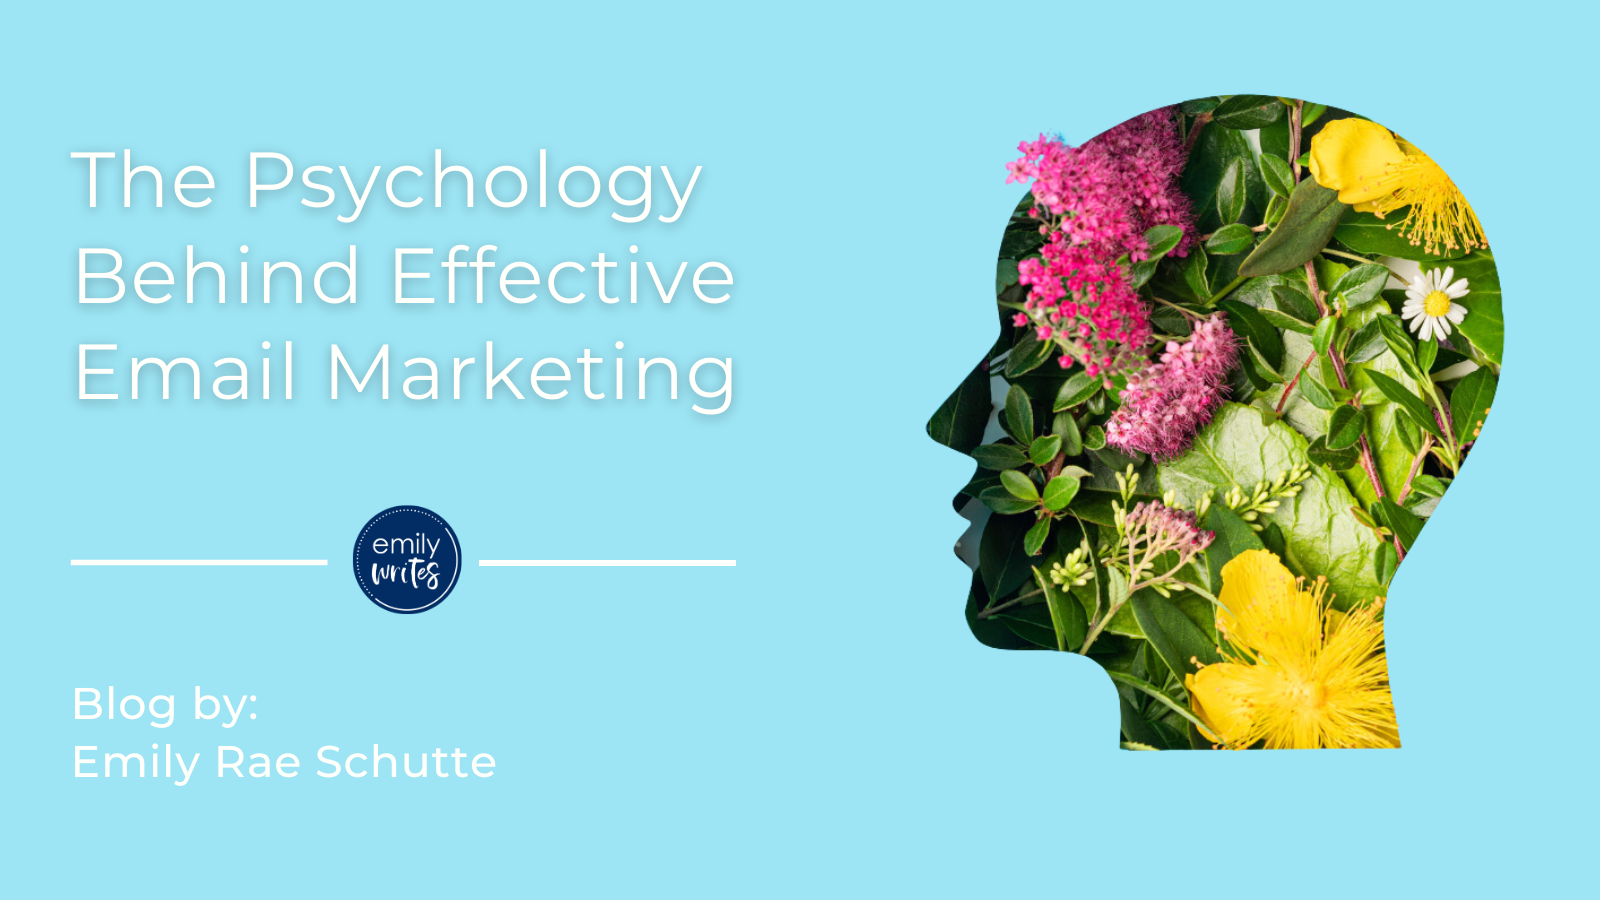 The Psychology Behind Effective Email Marketing